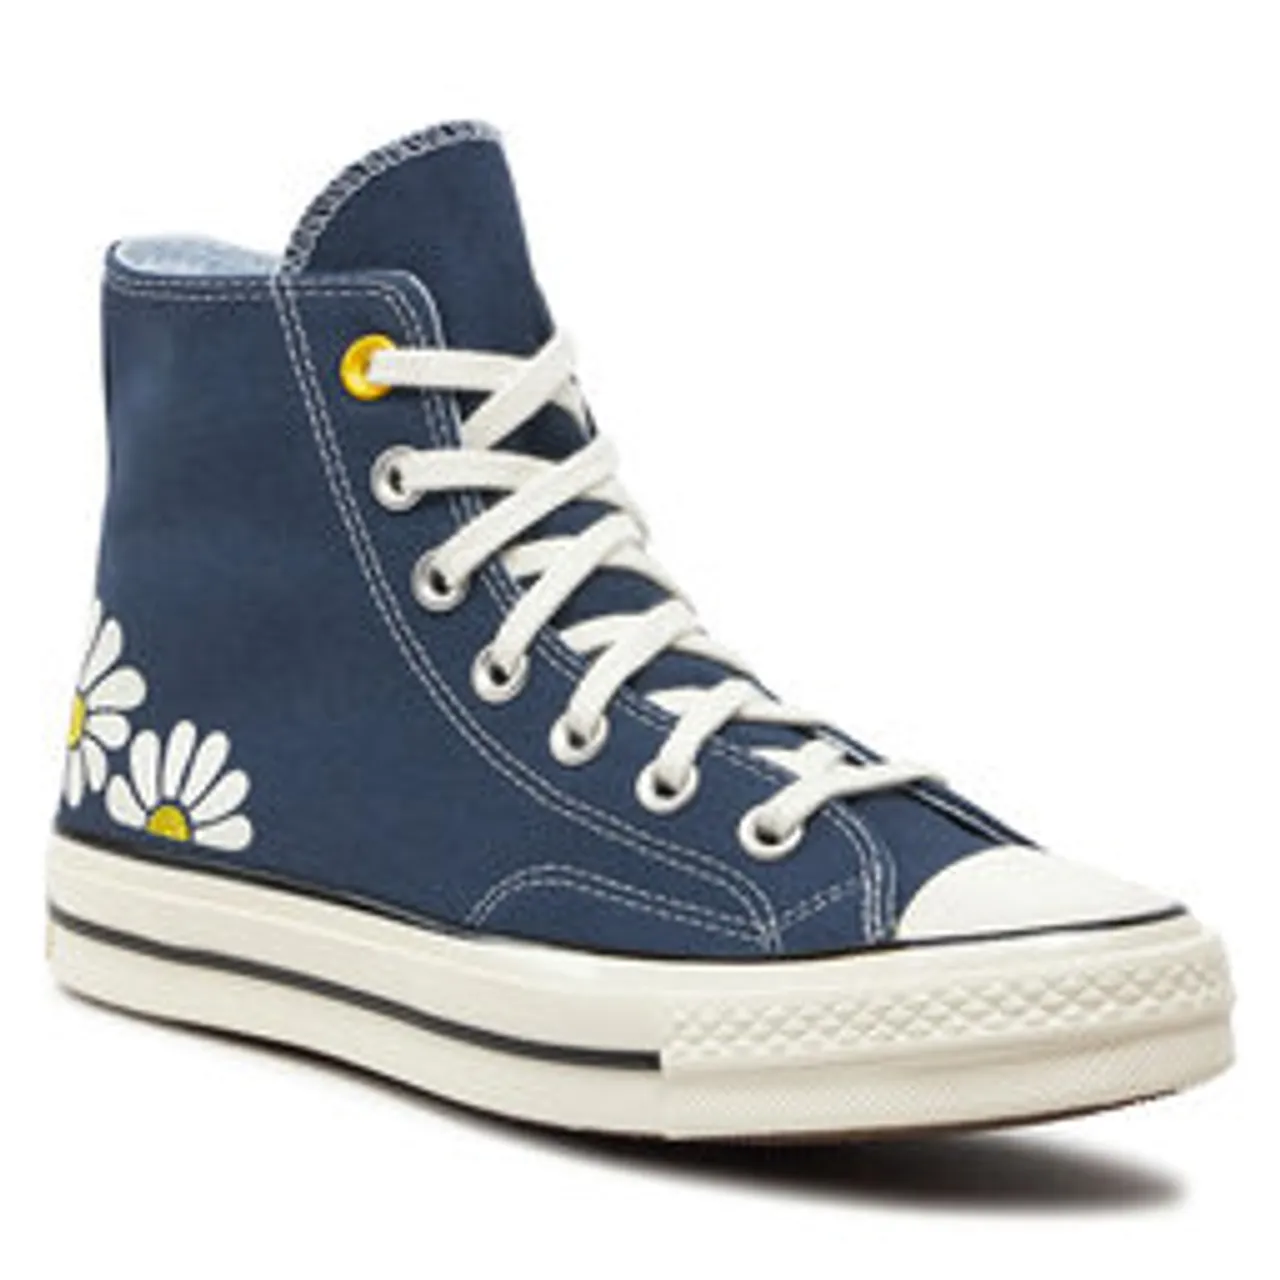 Sneakers aus Stoff Converse Chuck 70 A08108C Navy Floral